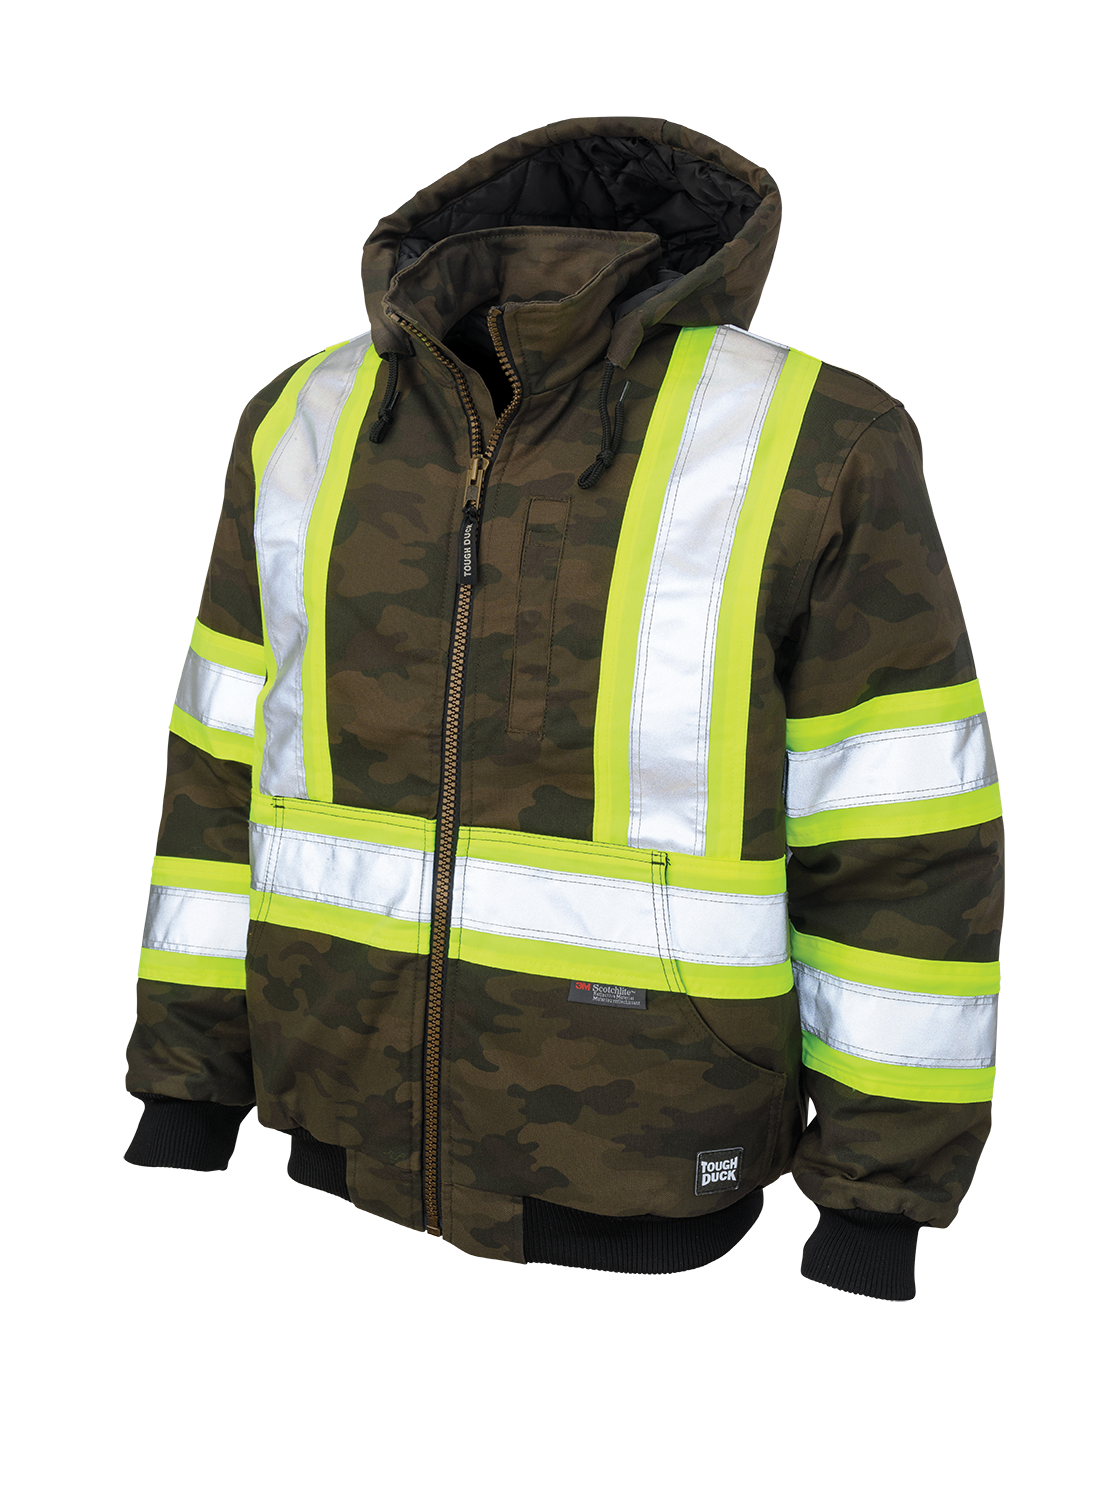 Tough Duck Workwear: Building Tough Gear for 80 Years - Full Source Blog